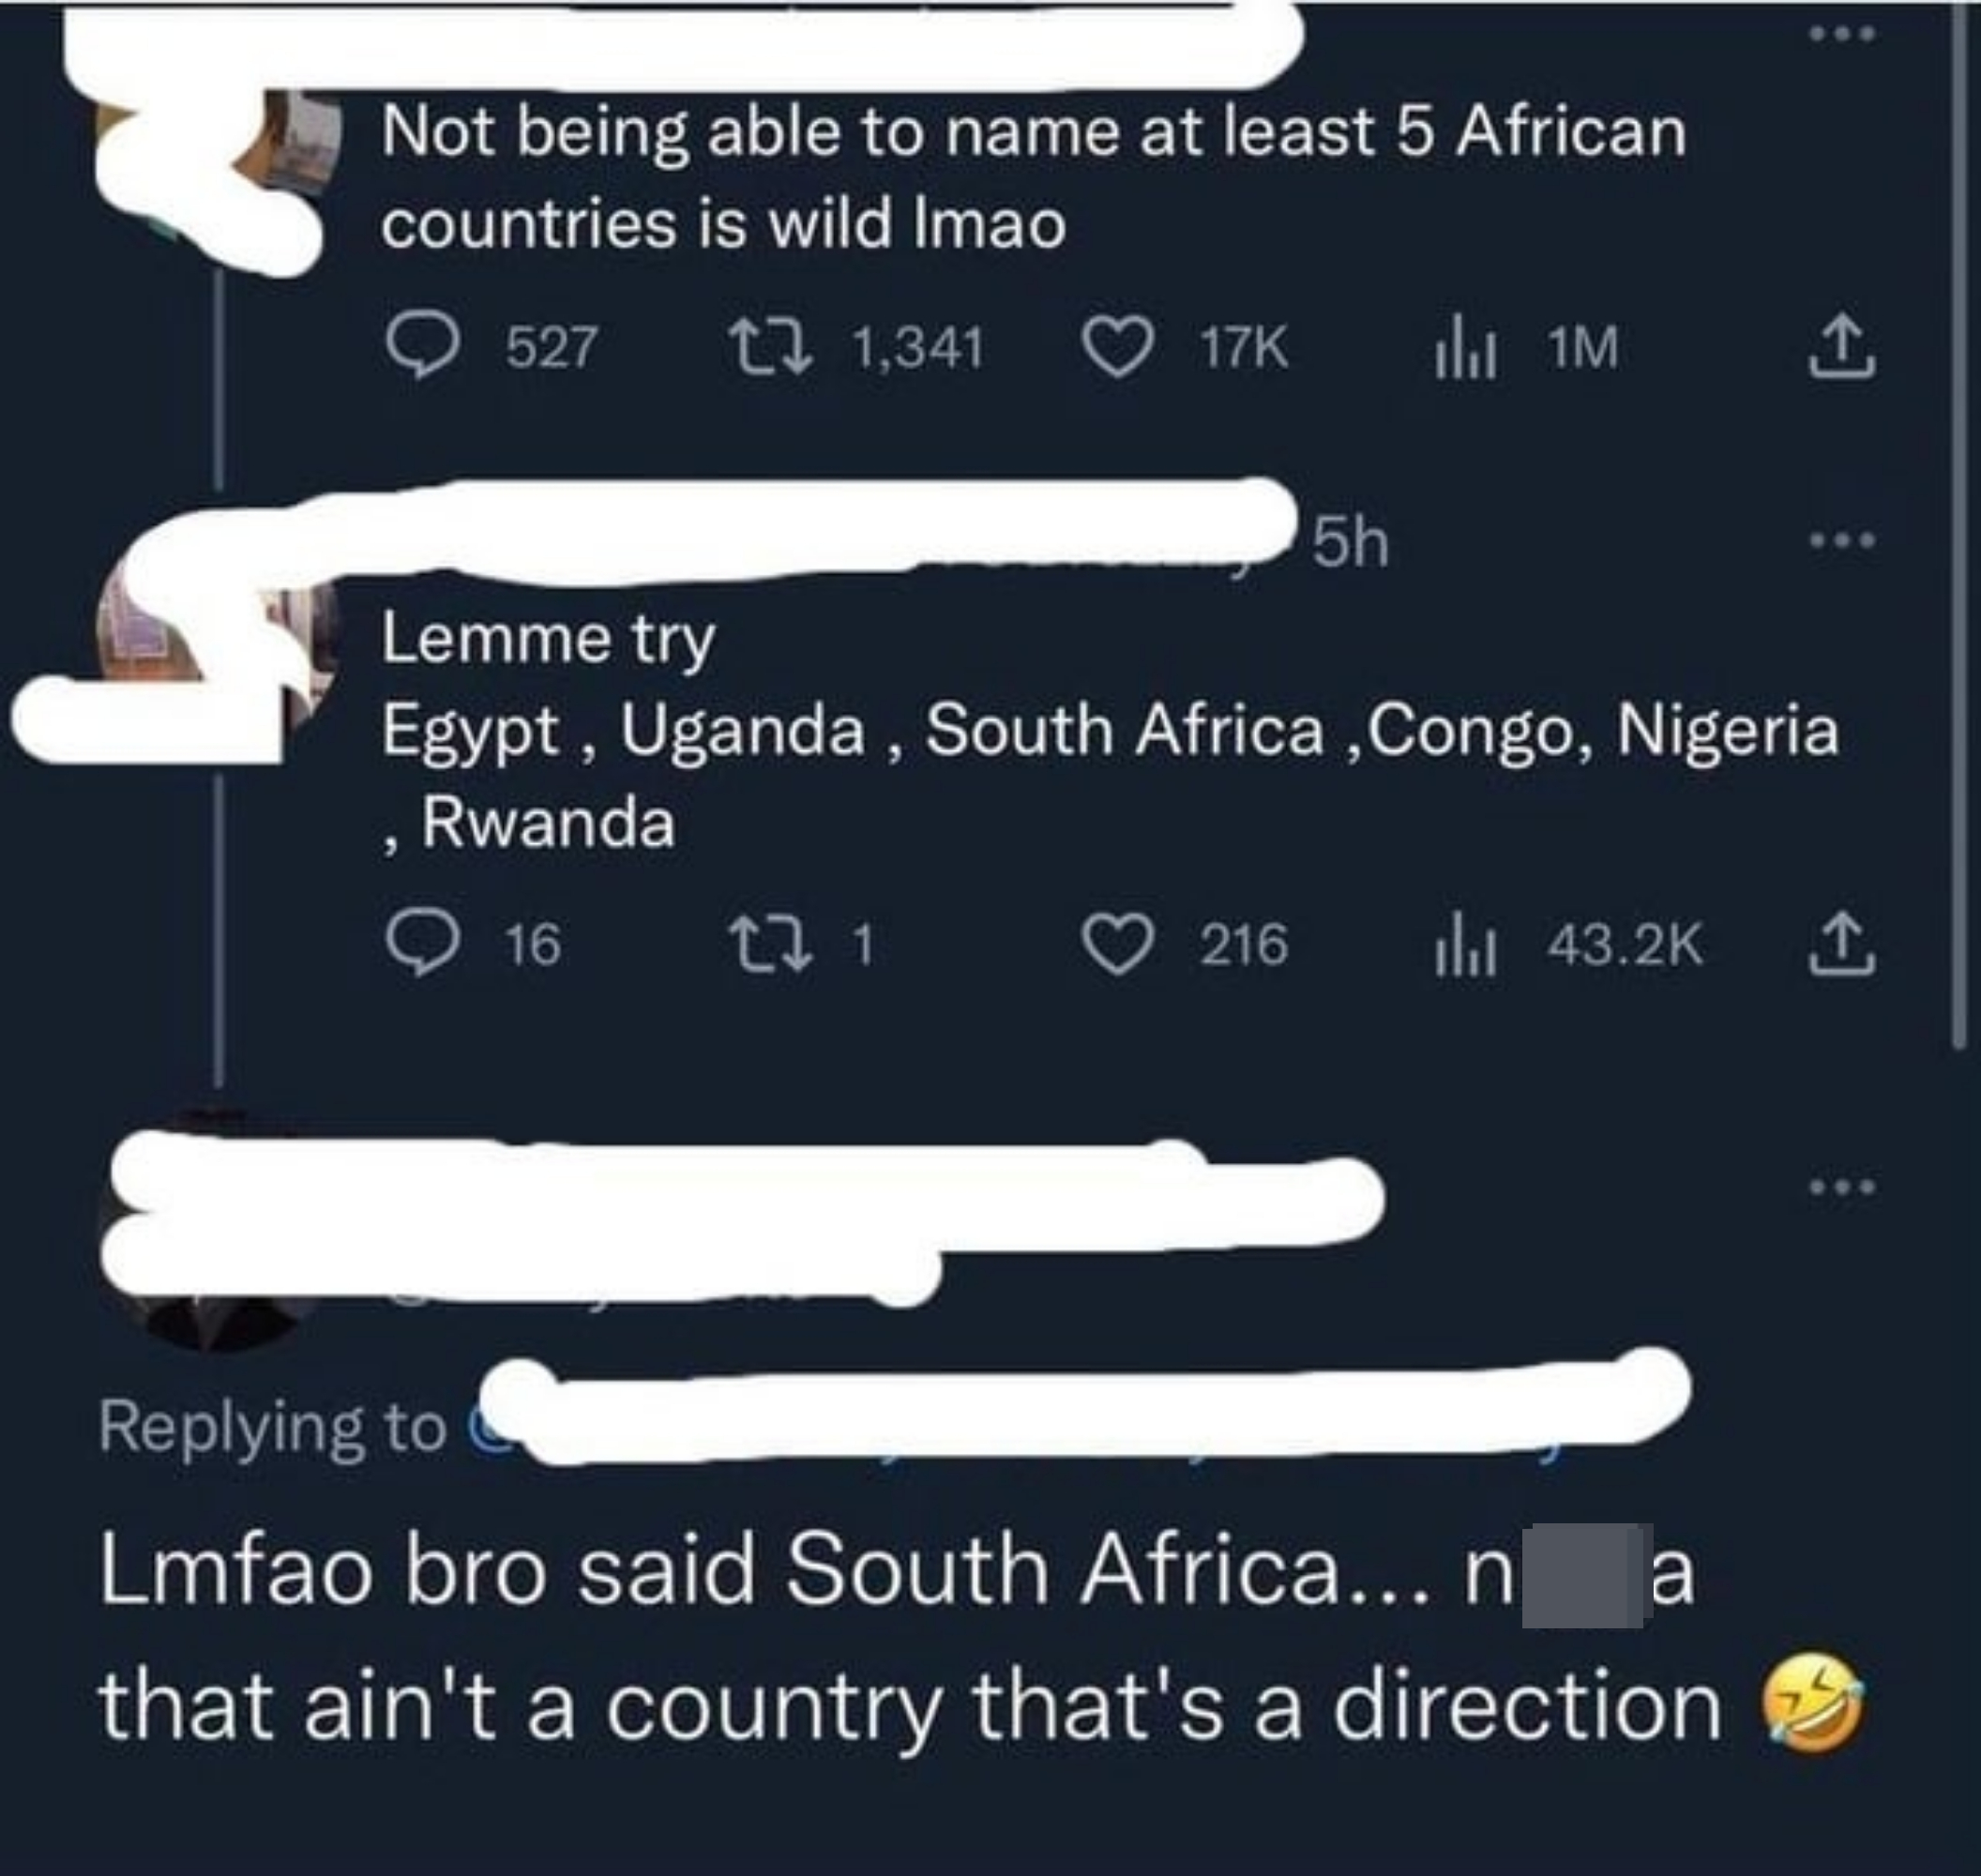 &quot;bro said South Africa, that ain&#x27;t a country that&#x27;s a direction&quot;